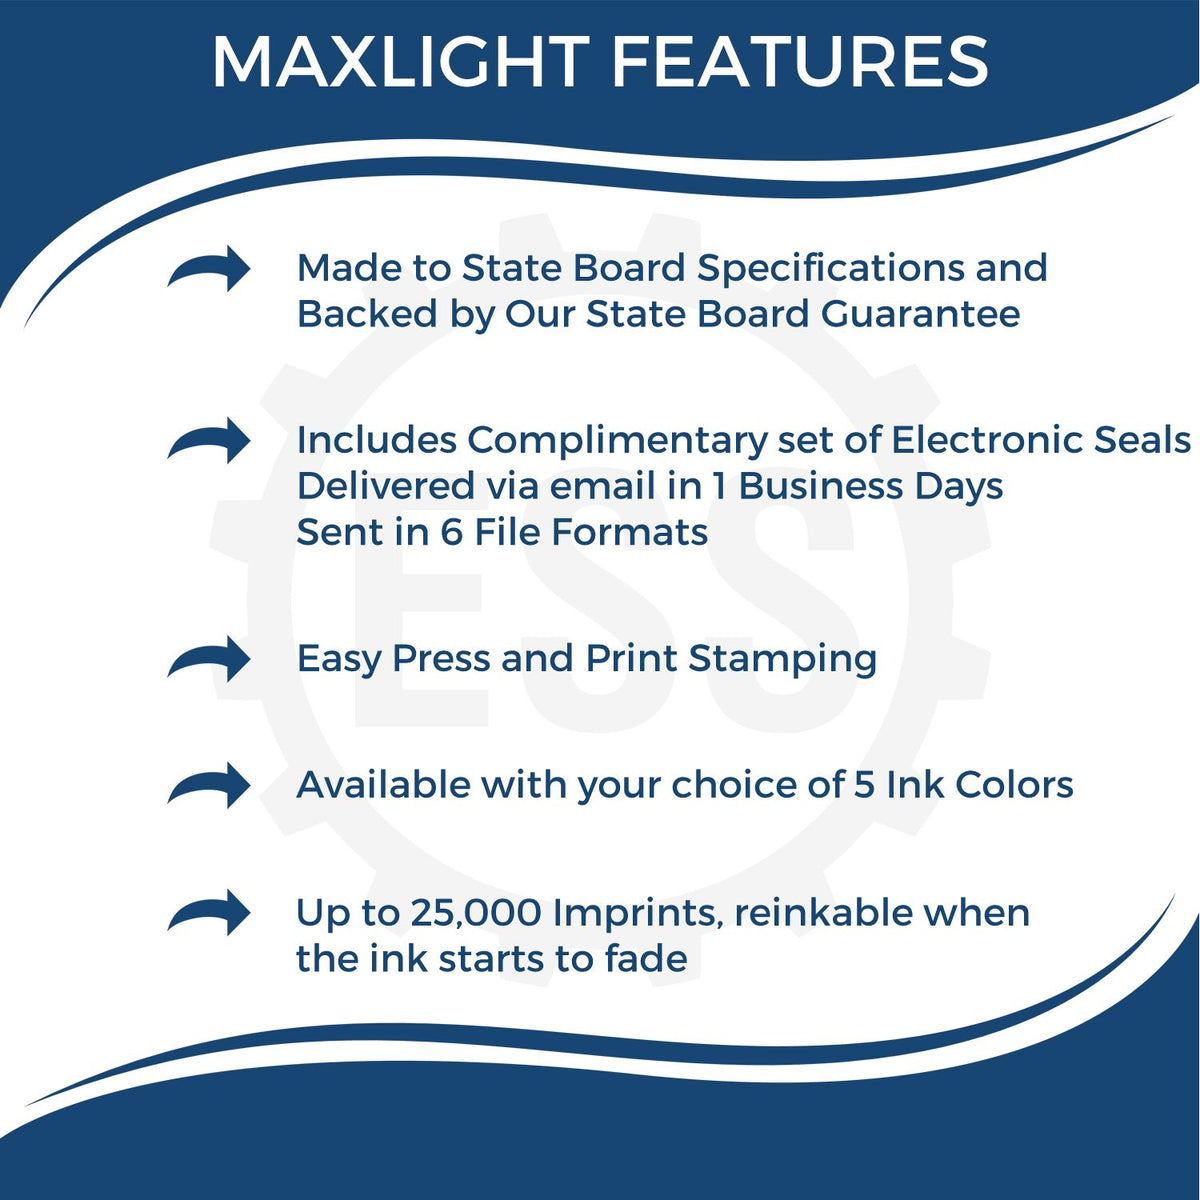 A picture of an infographic highlighting the selling points for the Premium MaxLight Pre-Inked Maine Geology Stamp